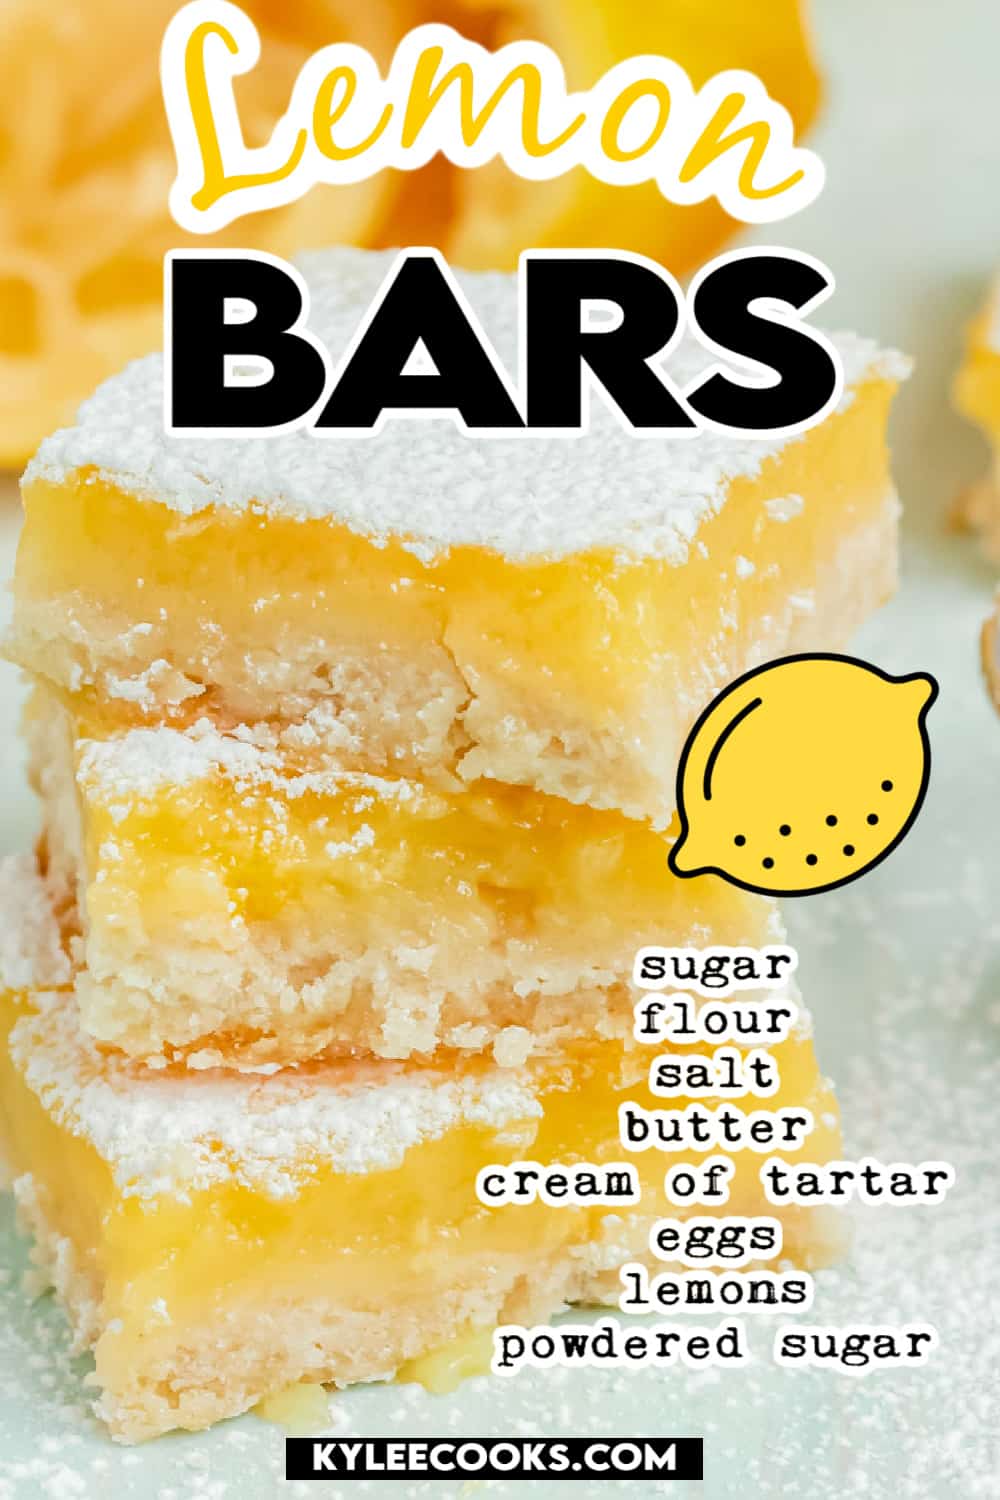 three lemon bars in a stack with recipe ingredients and title overlaid in text.